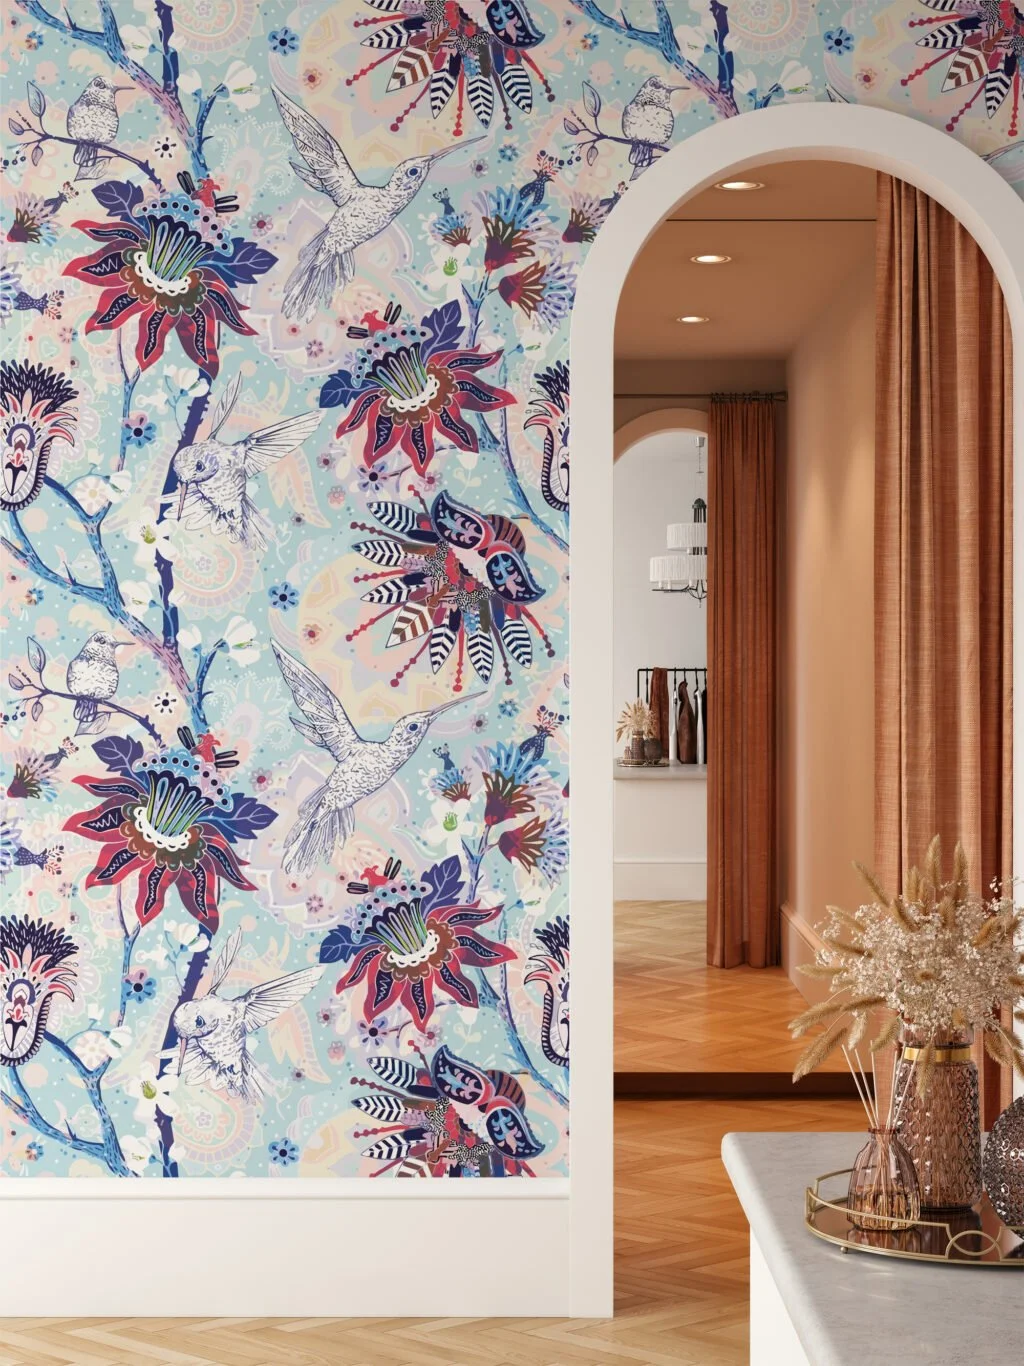 Floral Paisley Pattern With Hummingbirds Illustration Wallpaper, Whimsical Birds and Florals Peel & Stick Wall Mural